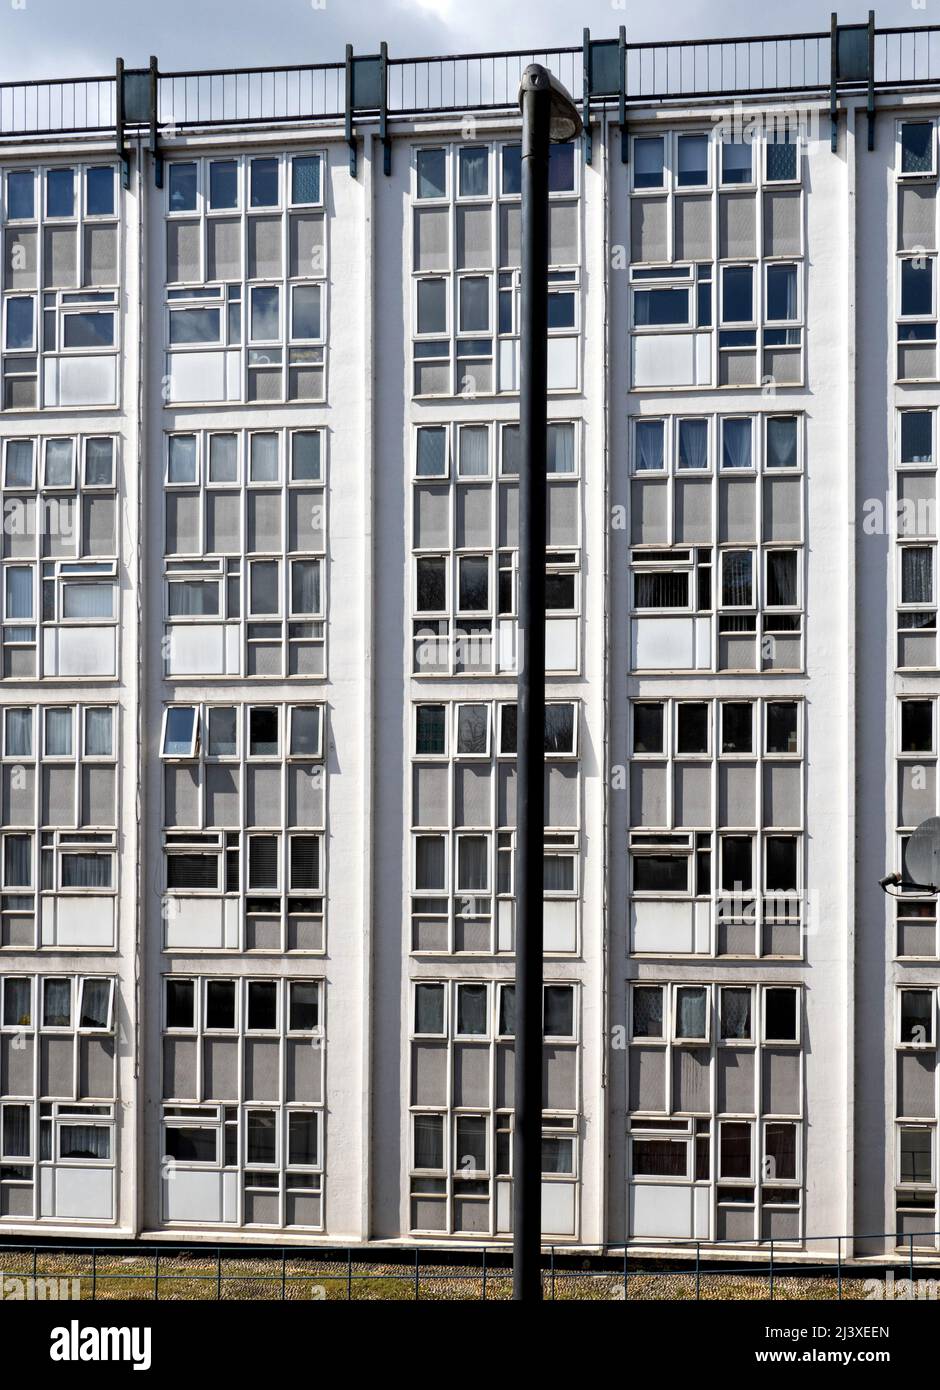 Uncompromising architecture of a block of flats in Bristol UK Stock Photo